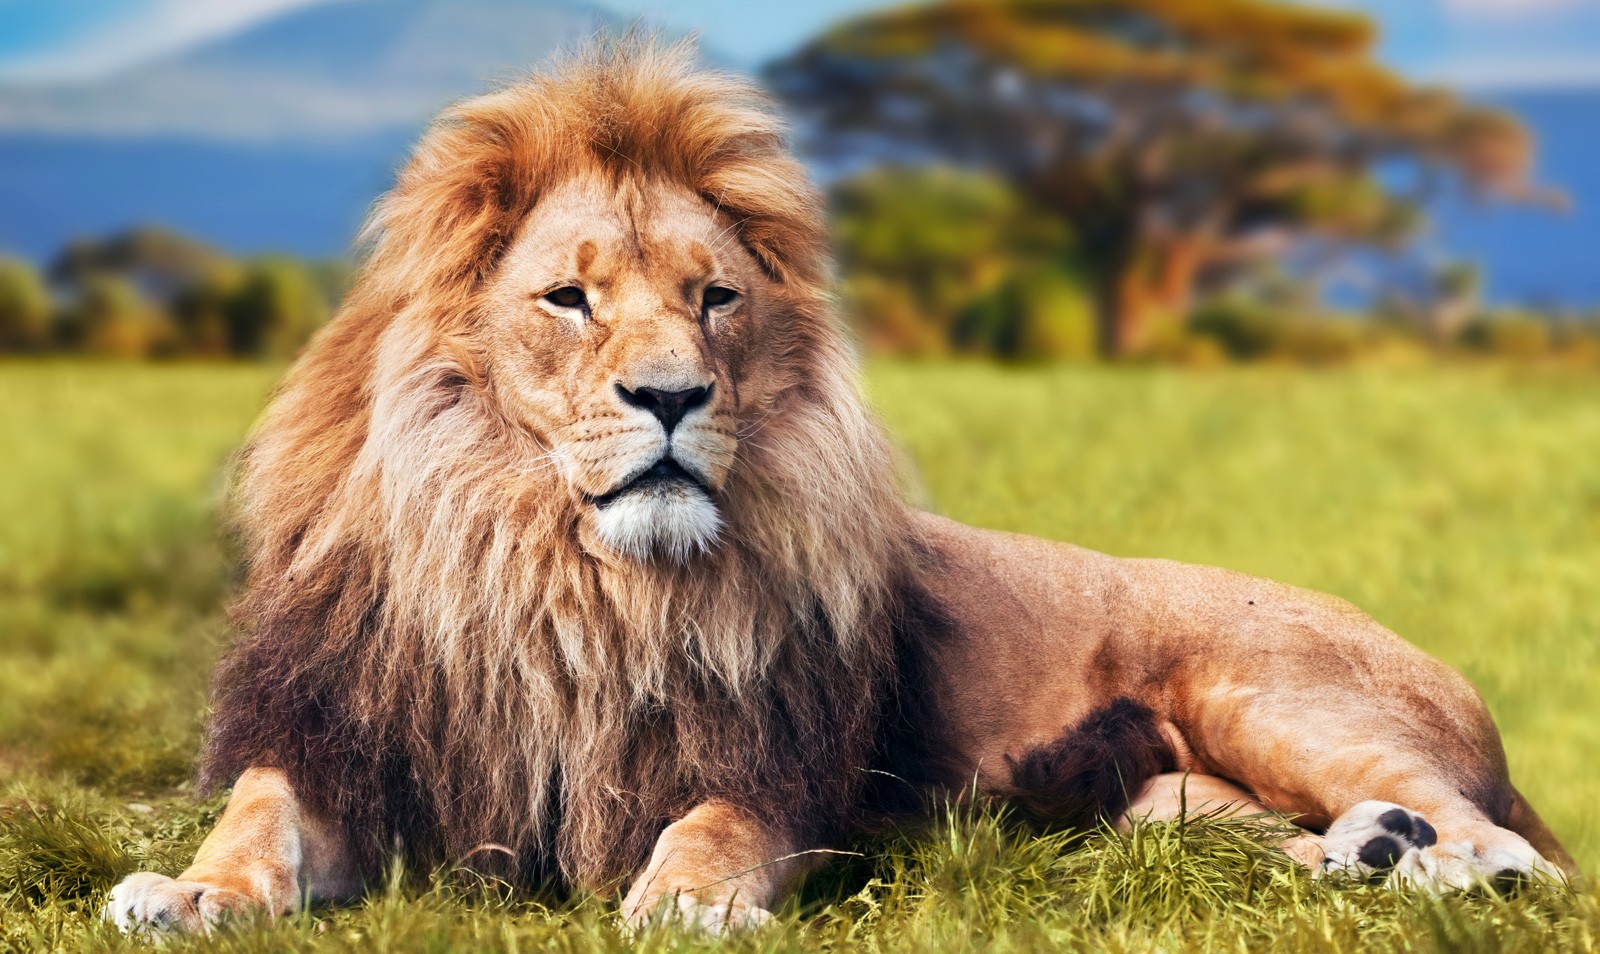 Symbolic Meaning of Lions